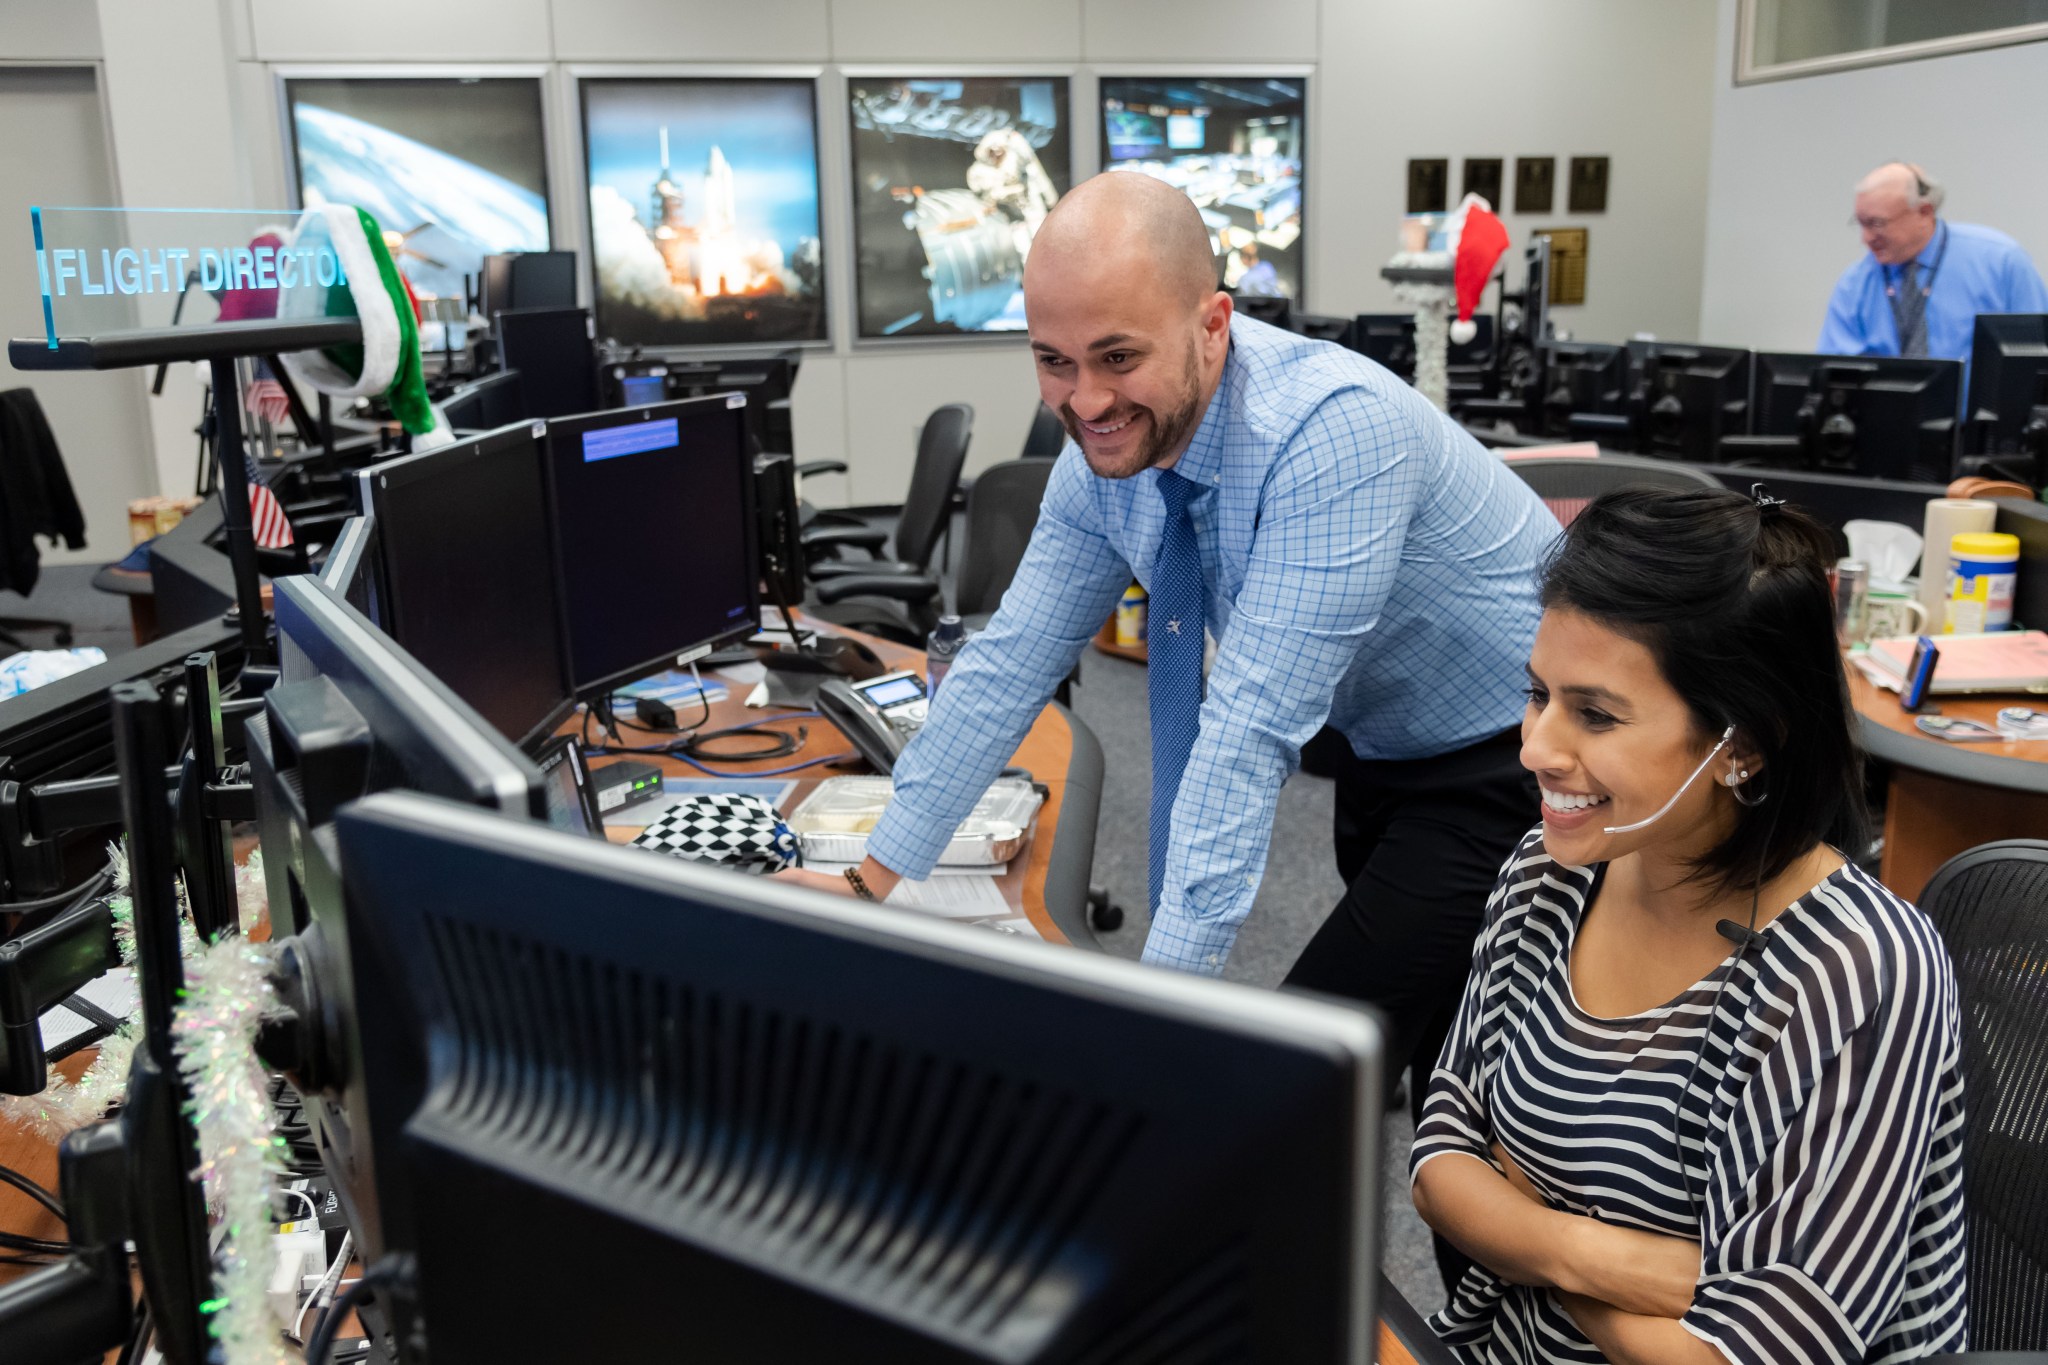 Expedition 61 Flight Directors Marcos Flores and Pooja Jesrani along with their team of flight controllers monitor operations